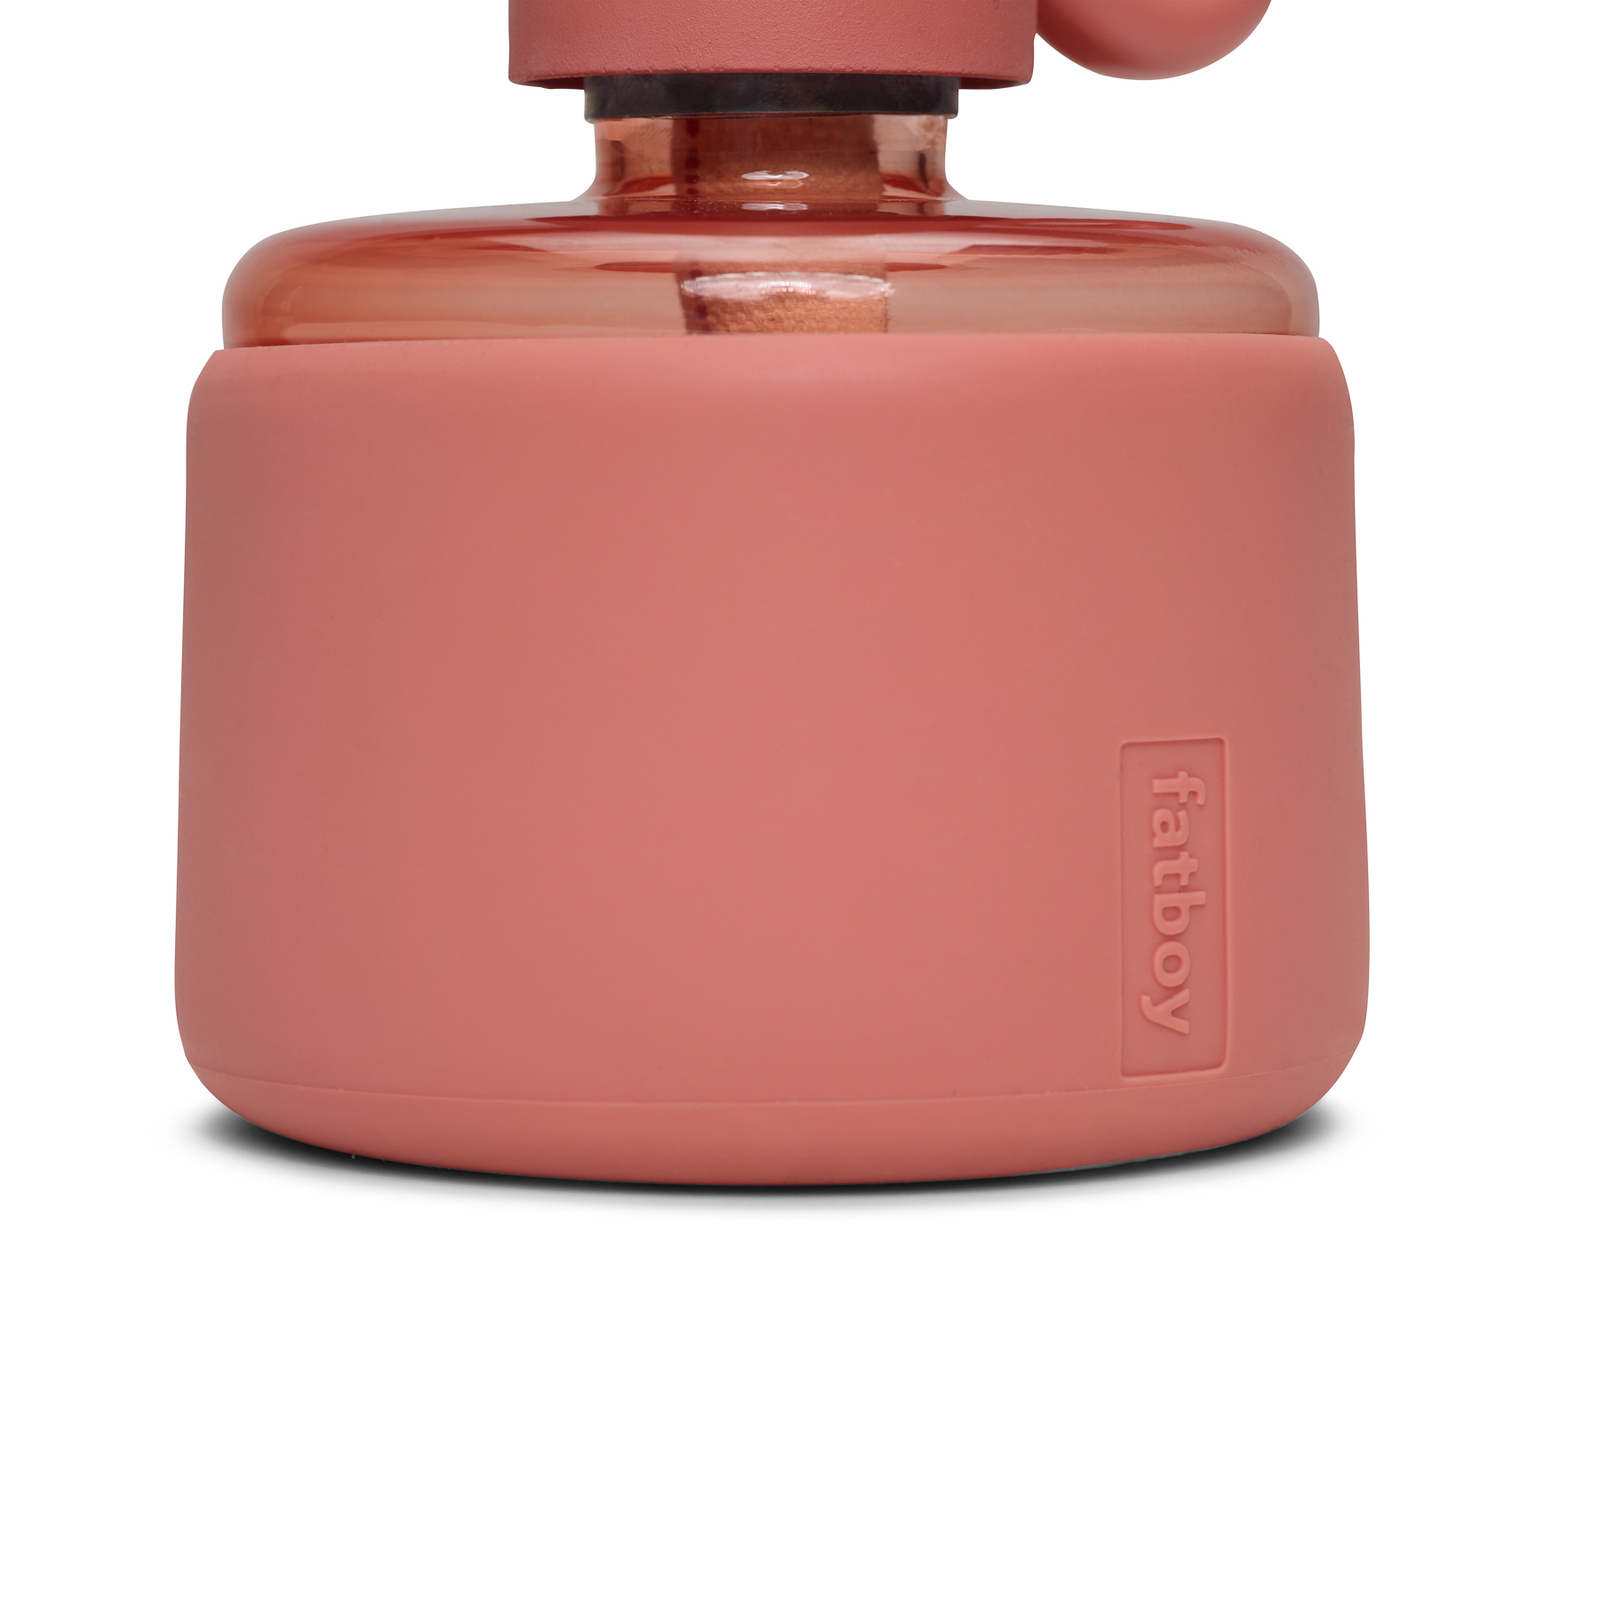 Fatboy Flamtastique XS lampe à huile, cheeky pink